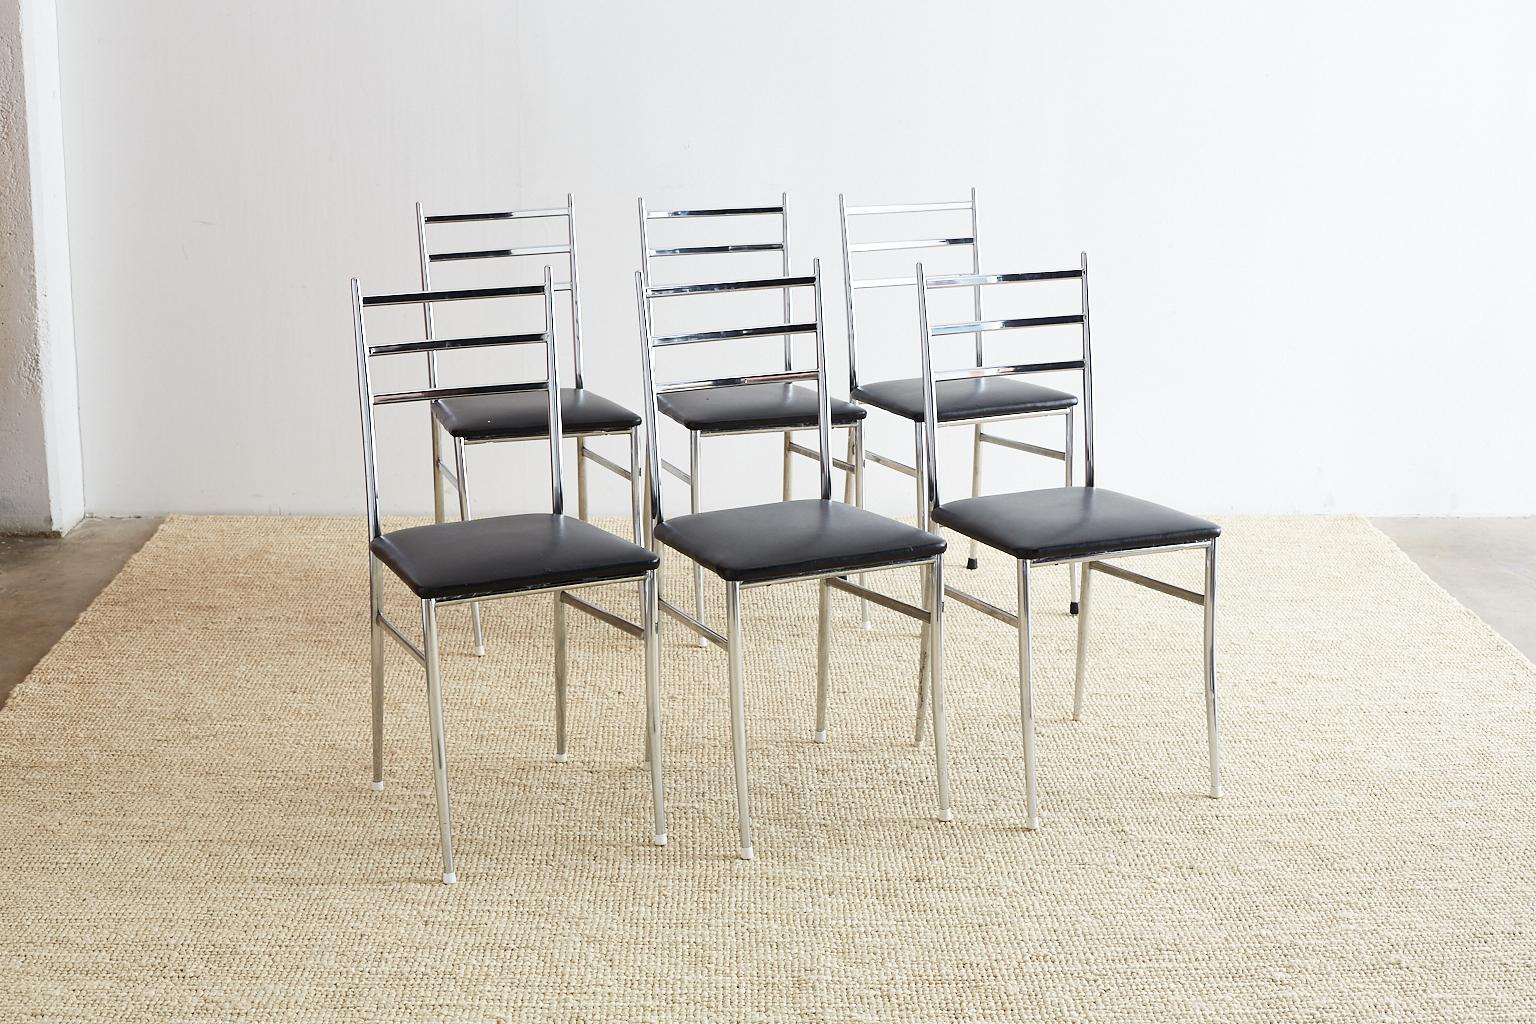 Mid-Century Modern set of six superleggera style dining chairs designed by Gio Ponti. Featuring an elegant chrome frame and a ladder back design. Fitted with black vintage vinyl upholstery. These iconic chairs have round legs that are slightly